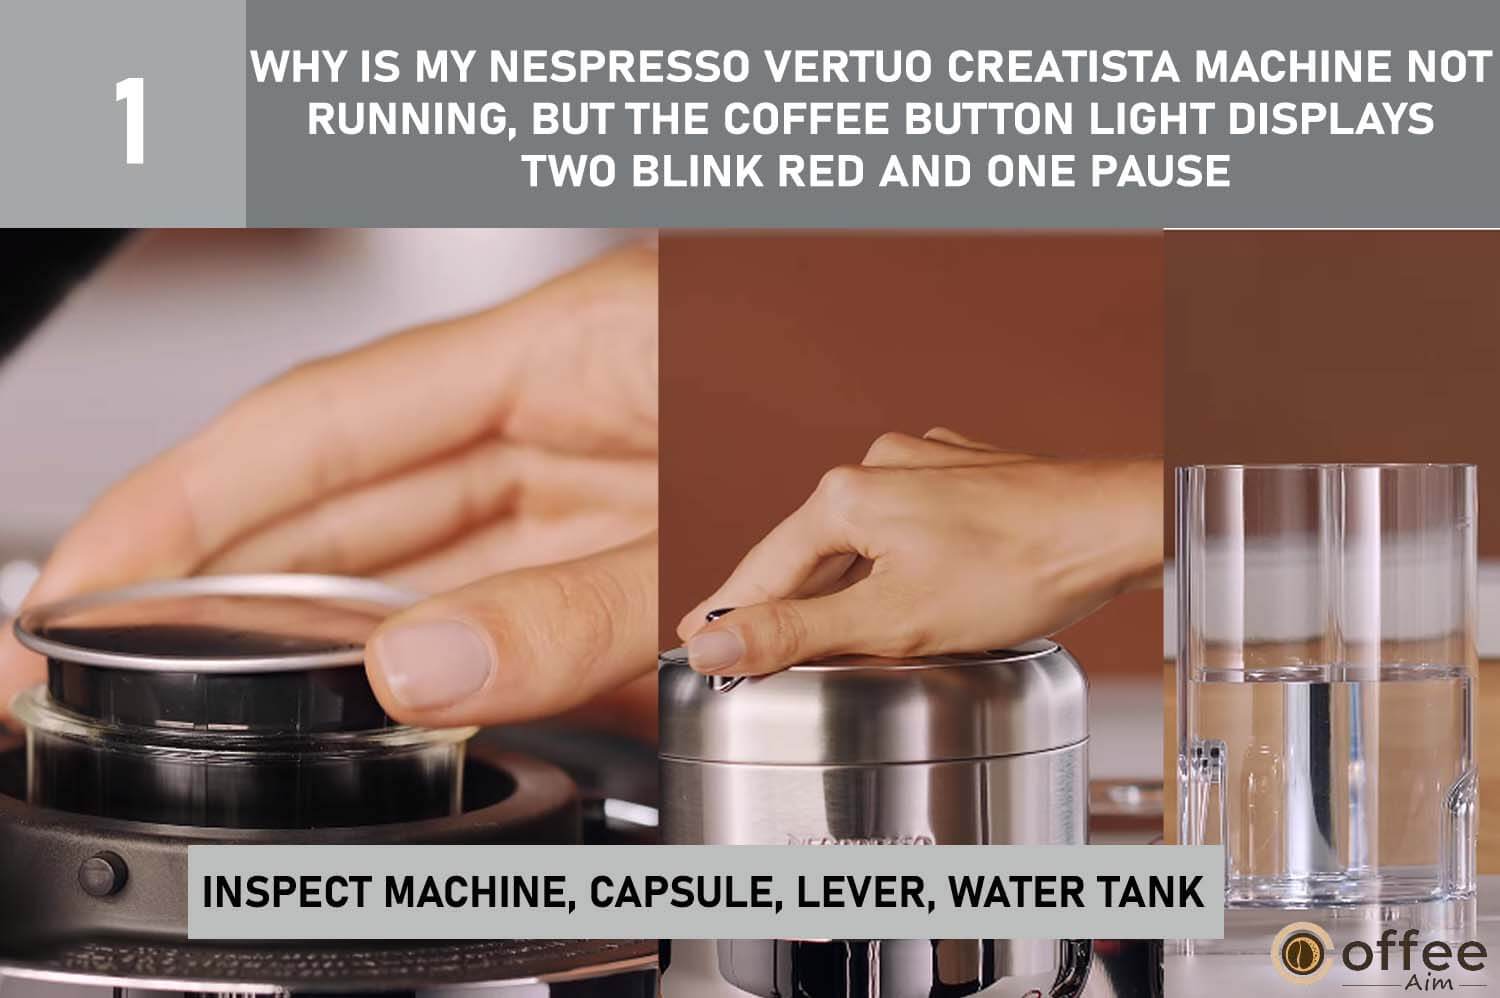 The Nespresso Vertuo Creatista isn't working. Check machine, lever, capsule, and water tank. If the coffee button blinks, troubleshoot using article.




